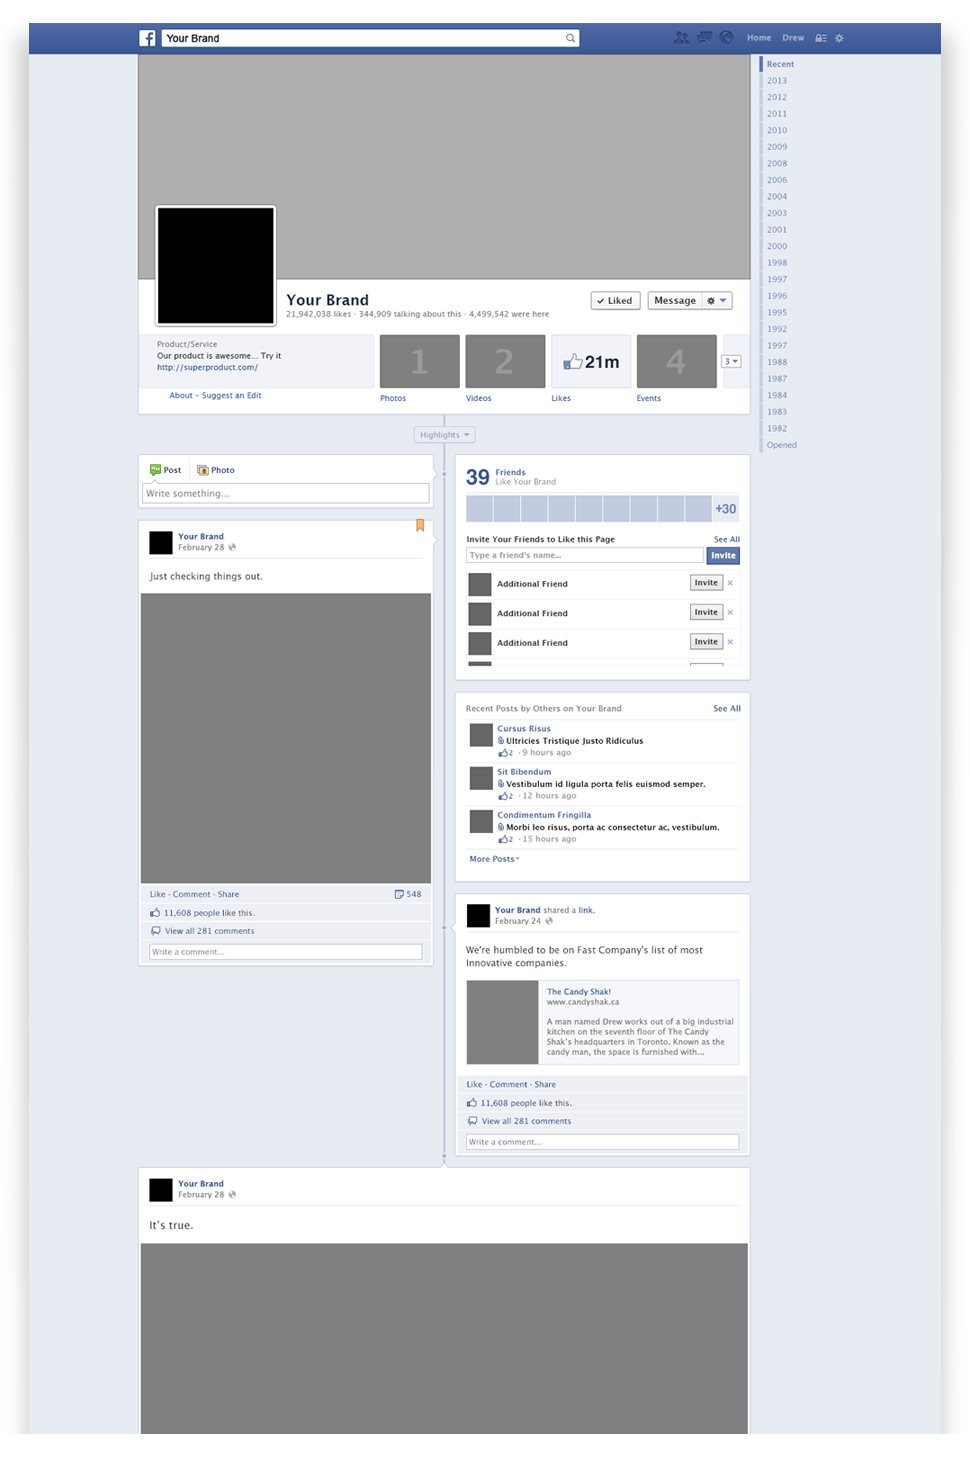 facebook page layout psd